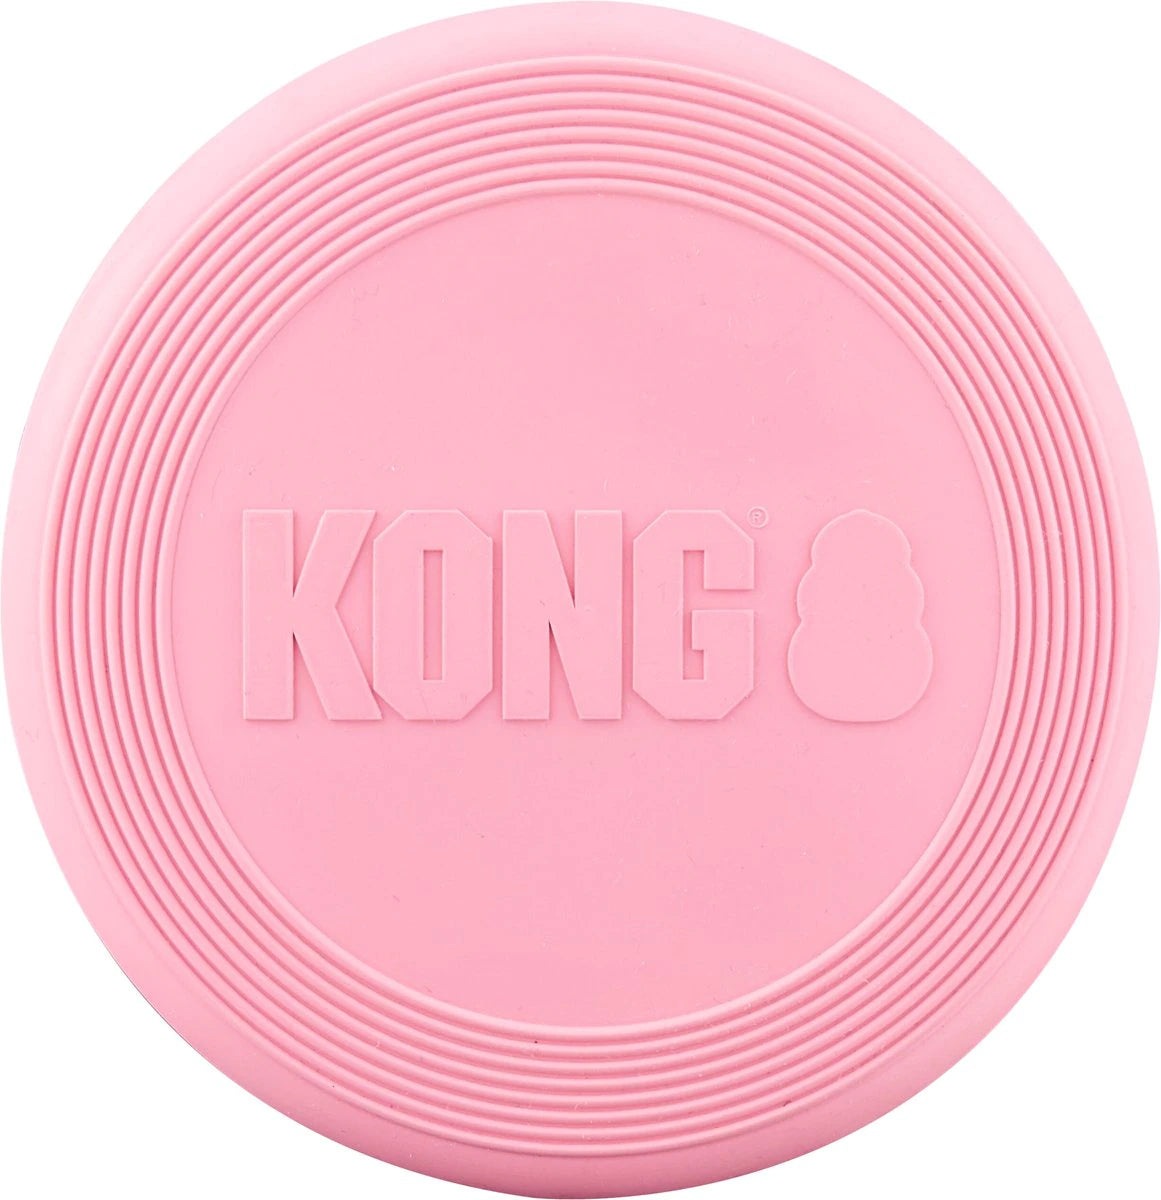 Kong Flyer: Small & Large / CHEAPER THAN CHEWY!